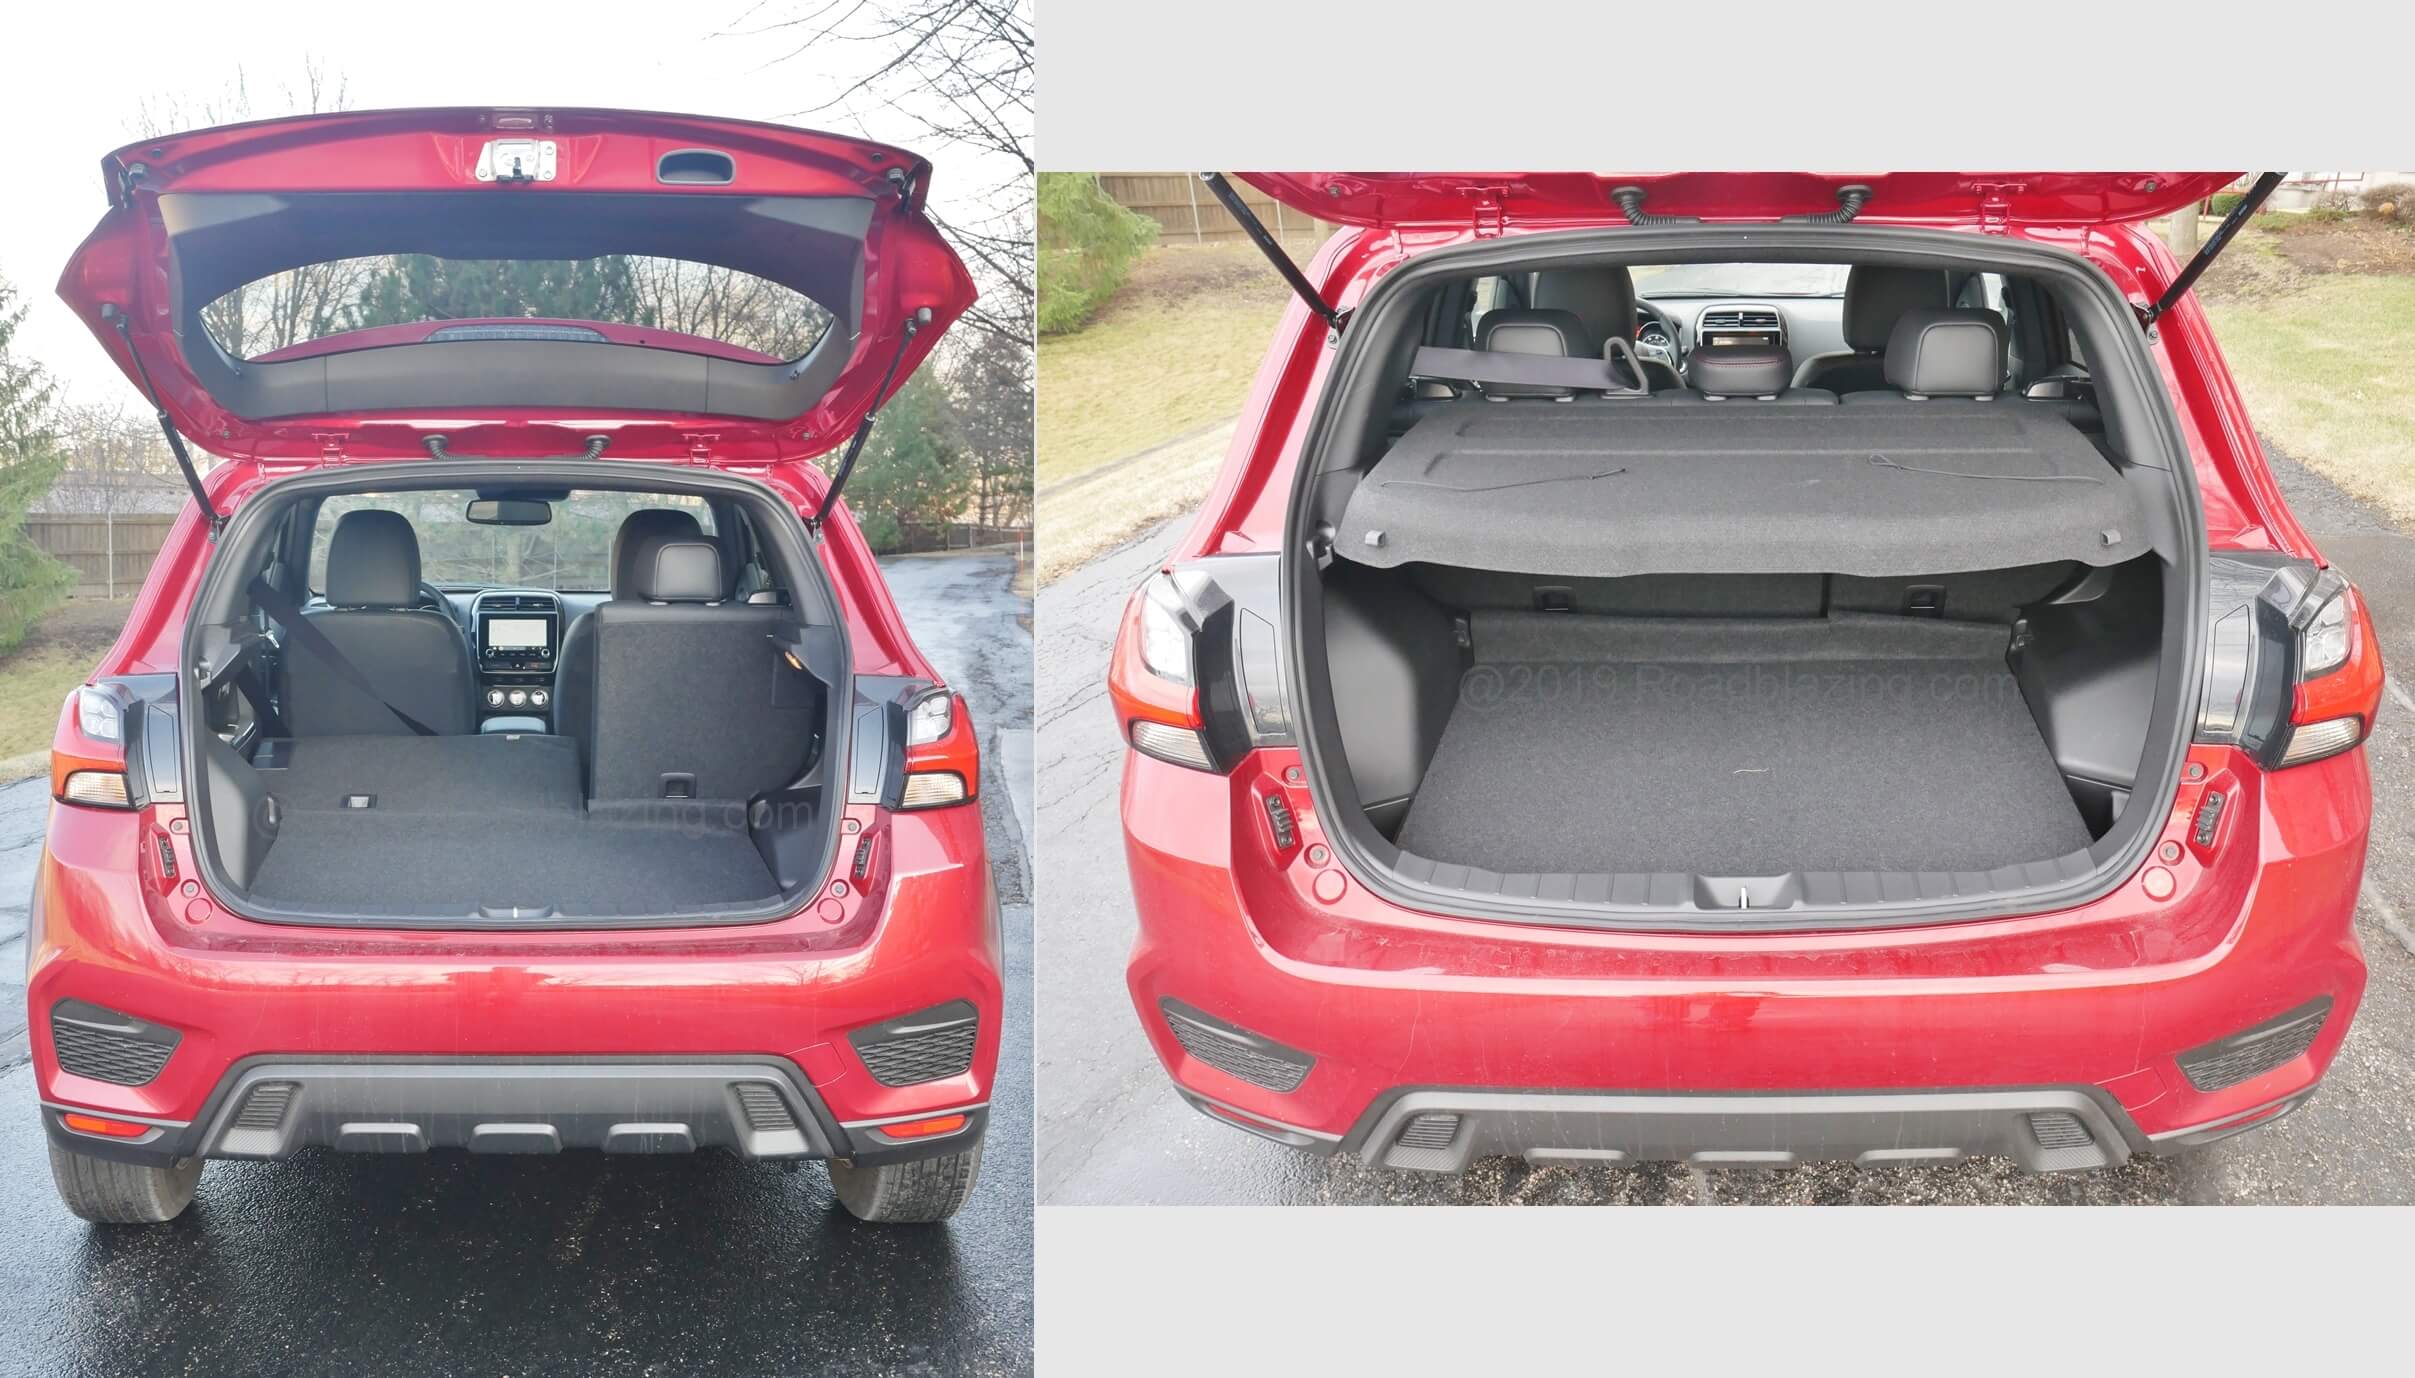 2020 Mitsubishi Outlander Sport 2.4 GT AWC: Deep cord to liftgate hinged parcel shelf for cargo privacy.